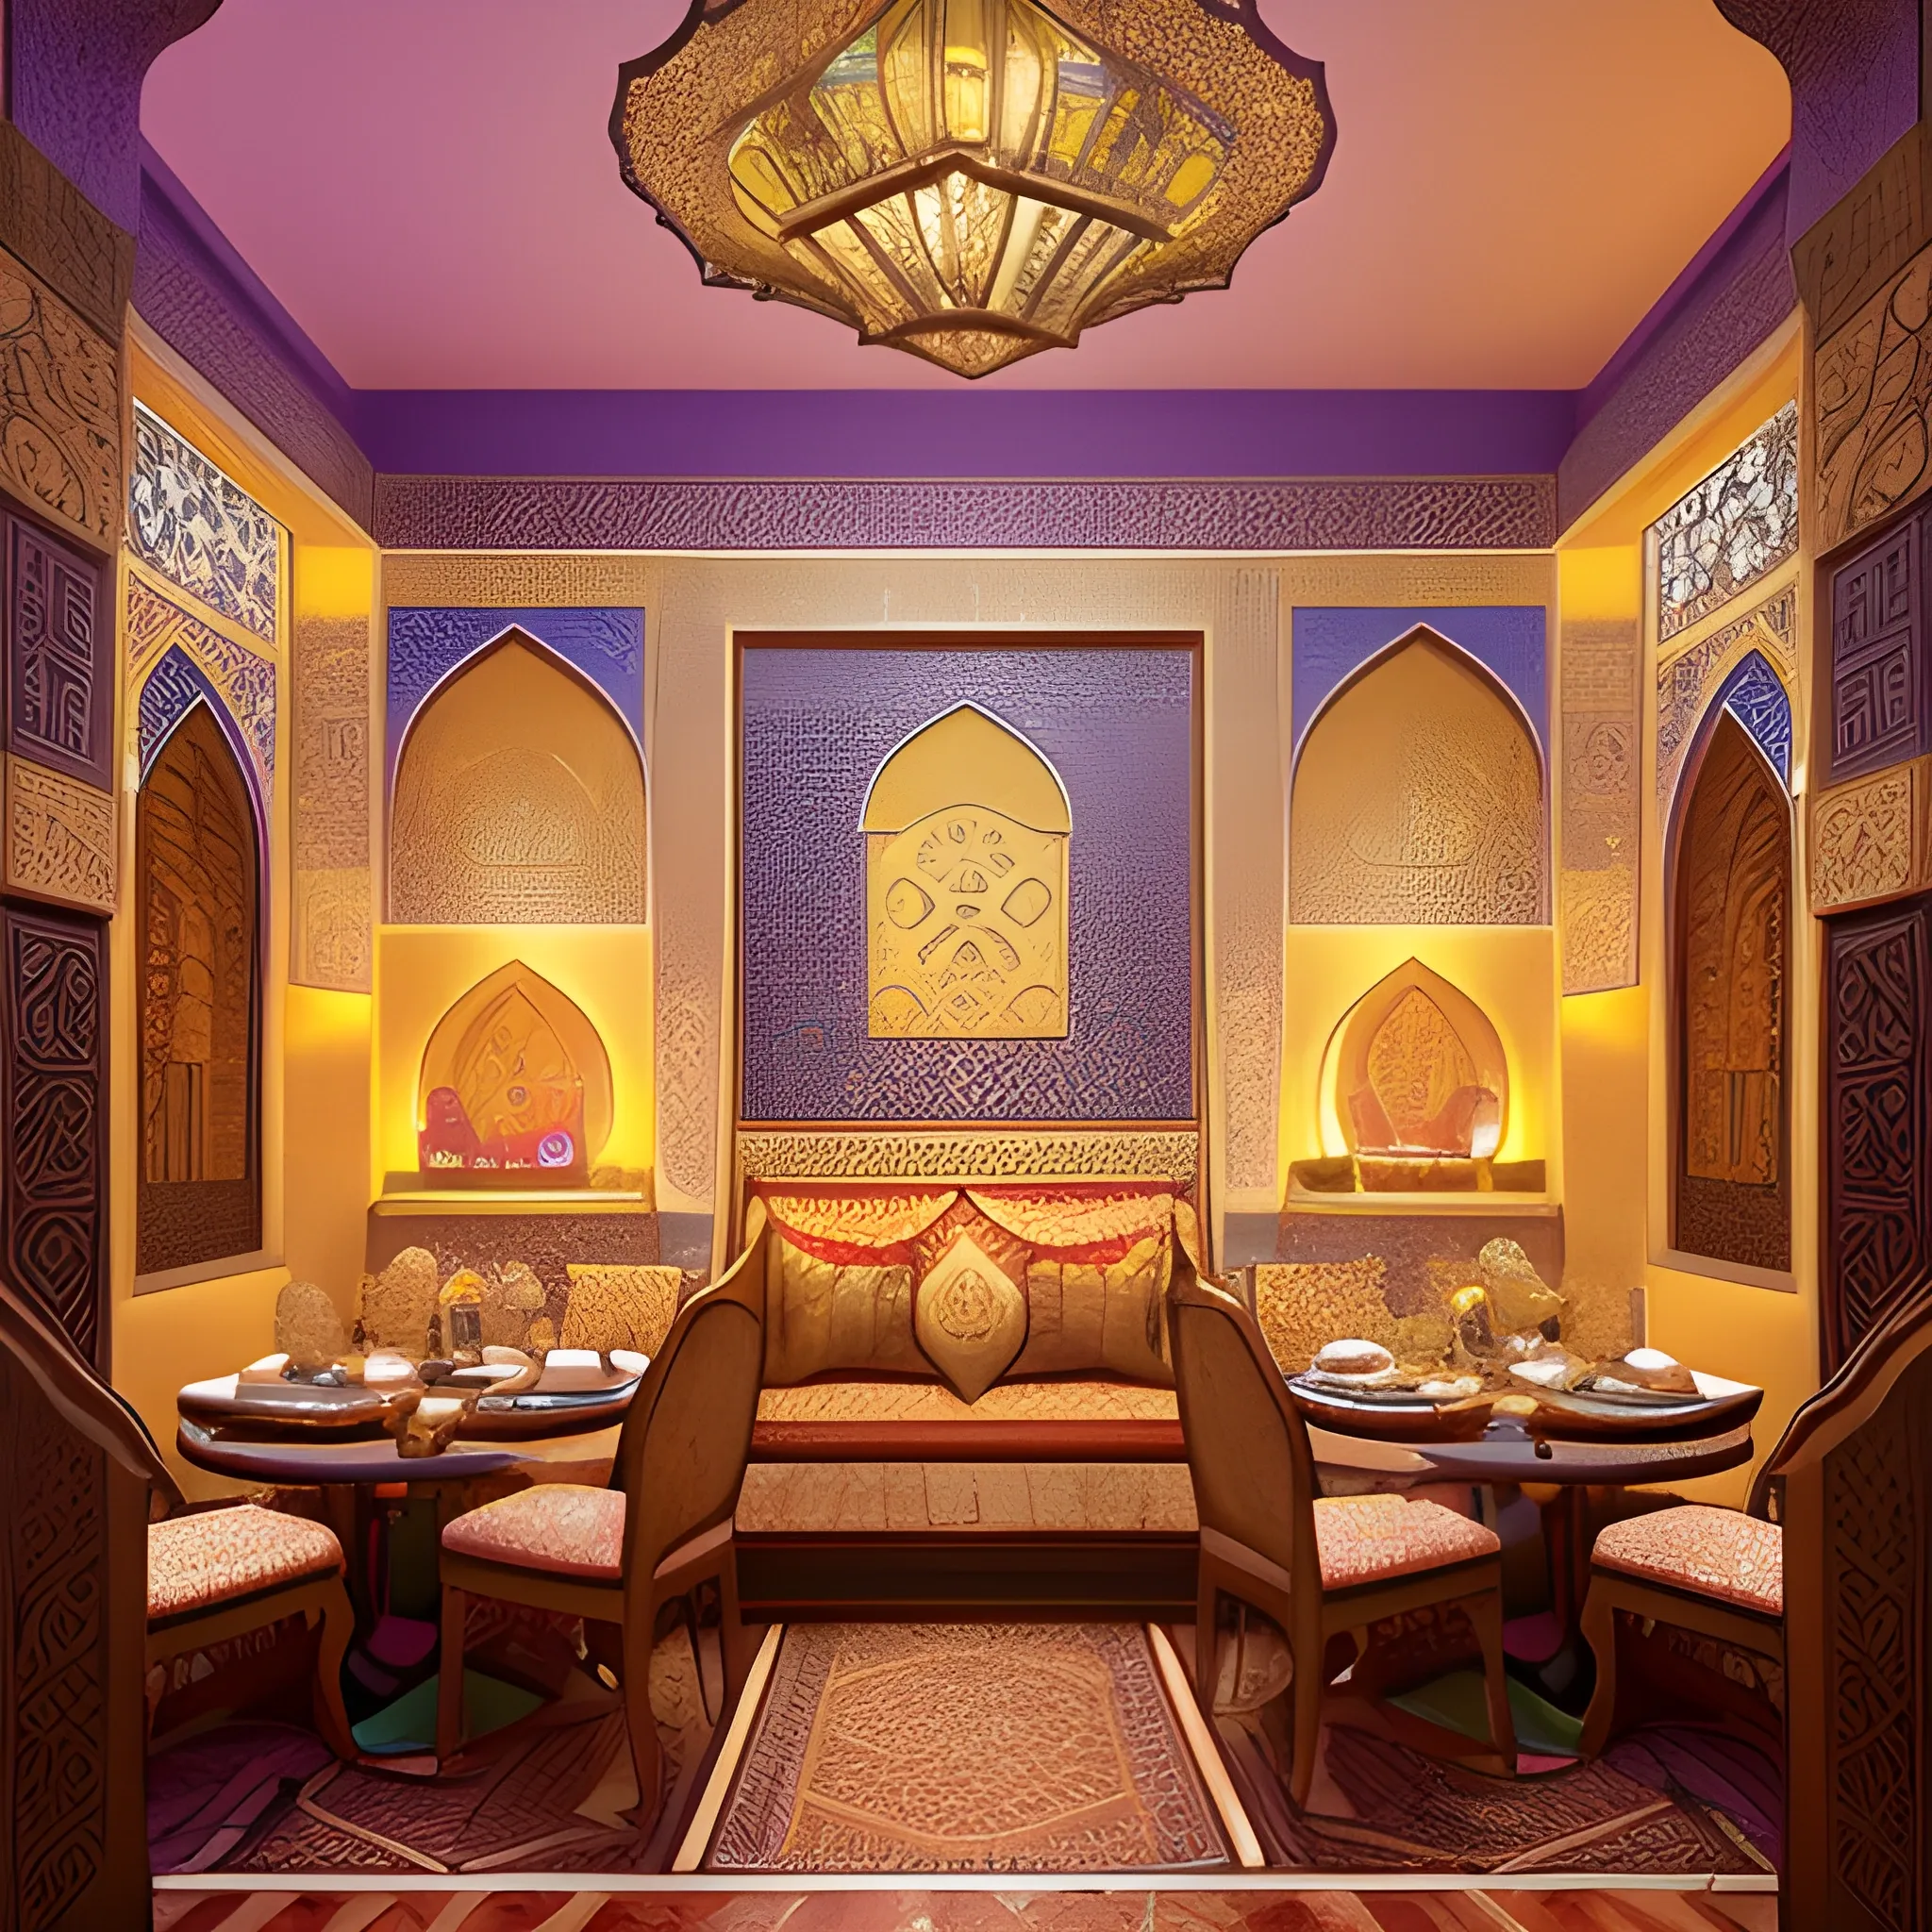 In the three-dimensional background of the image, one is immersed in a world of culinary artistry. The scene is adorned with intricate details of food preparation and dessert-making. Illuminated by angelic lighting, the setting exudes an ethereal aura. The colors seamlessly blend, creating a harmonious and inviting ambiance.

This captivating background seamlessly weaves Moroccan and Eastern ornamental patterns, reflecting a rich tapestry of cultural influences. The Moroccan motifs intertwine with Eastern designs, creating a visual feast for the eyes. The interplay of light and shadow accentuates the textures and patterns, enhancing the overall enchantment of the scene. It's a captivating fusion of culinary creativity and artistic design, providing a captivating backdrop for the culinary delights being prepared., 3D